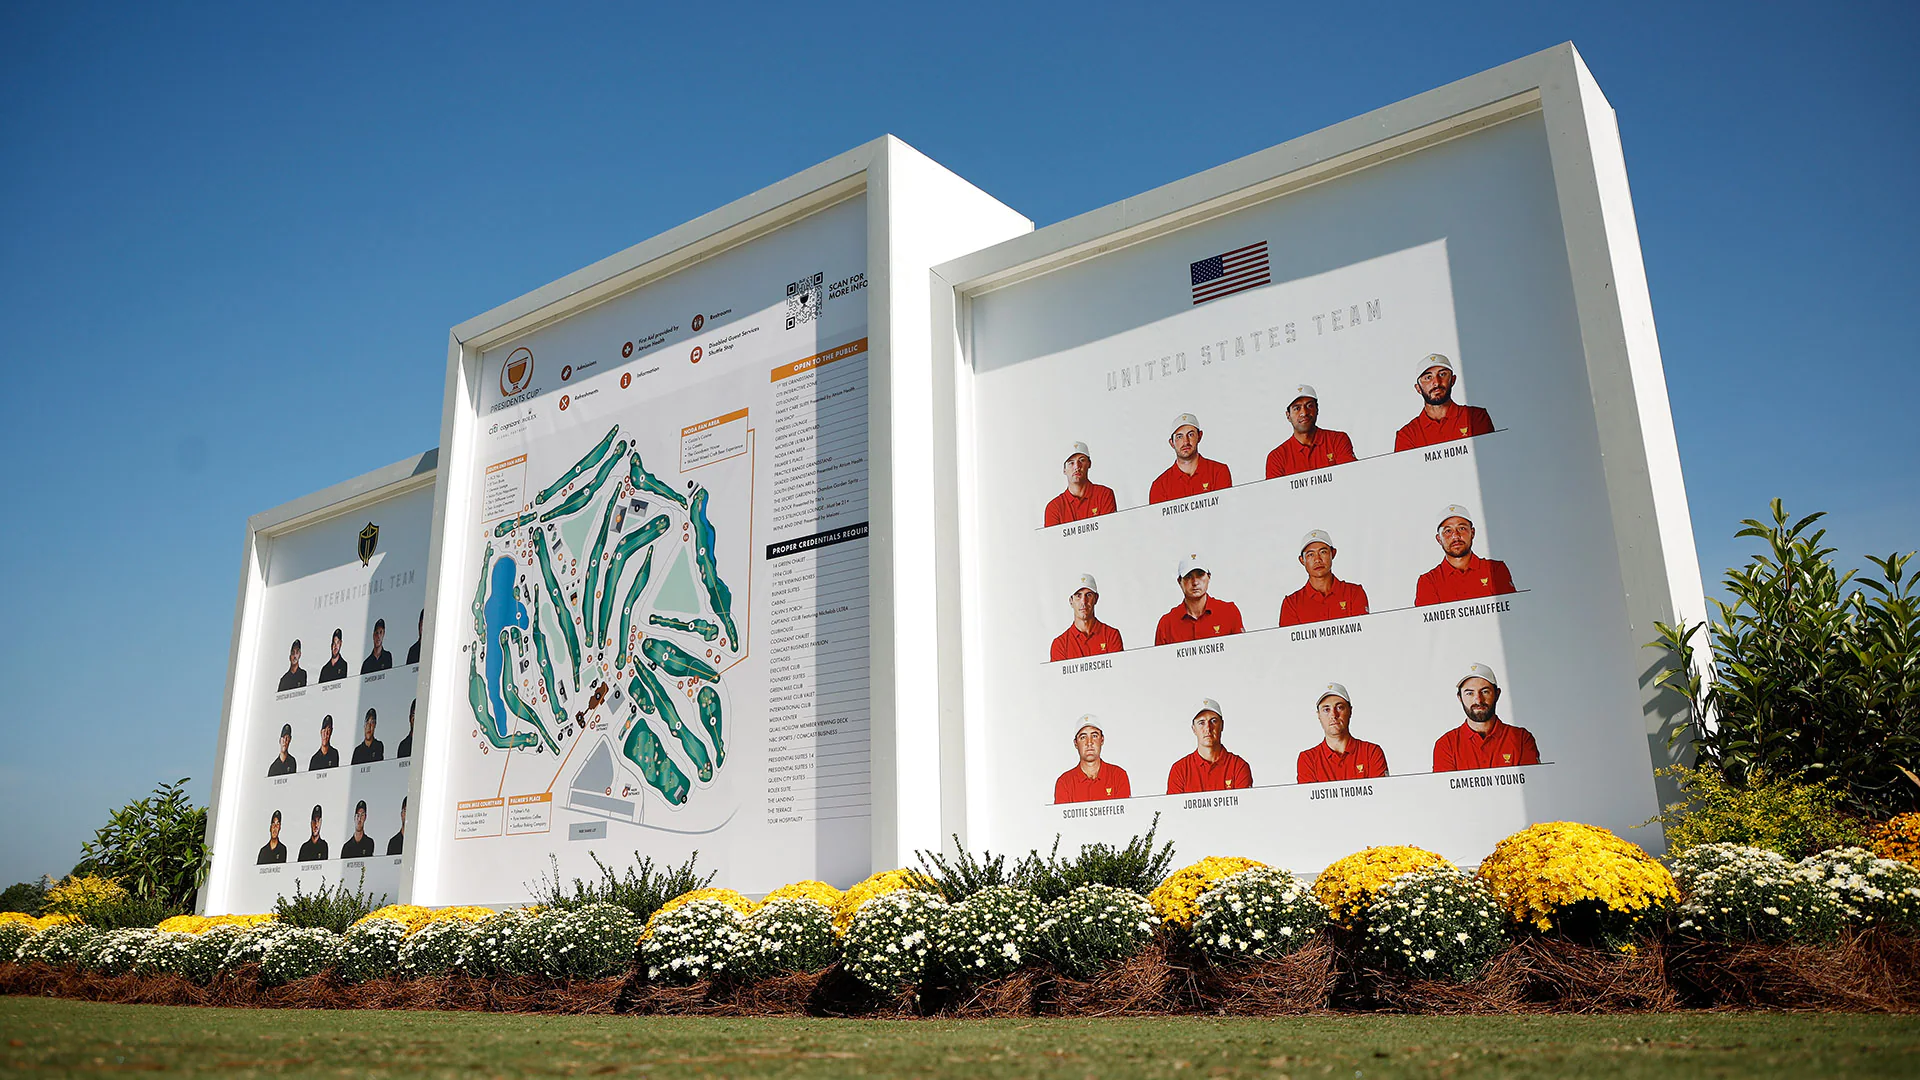 Presidents Cup: Player history at Quail Hollow, post 2016 renovation